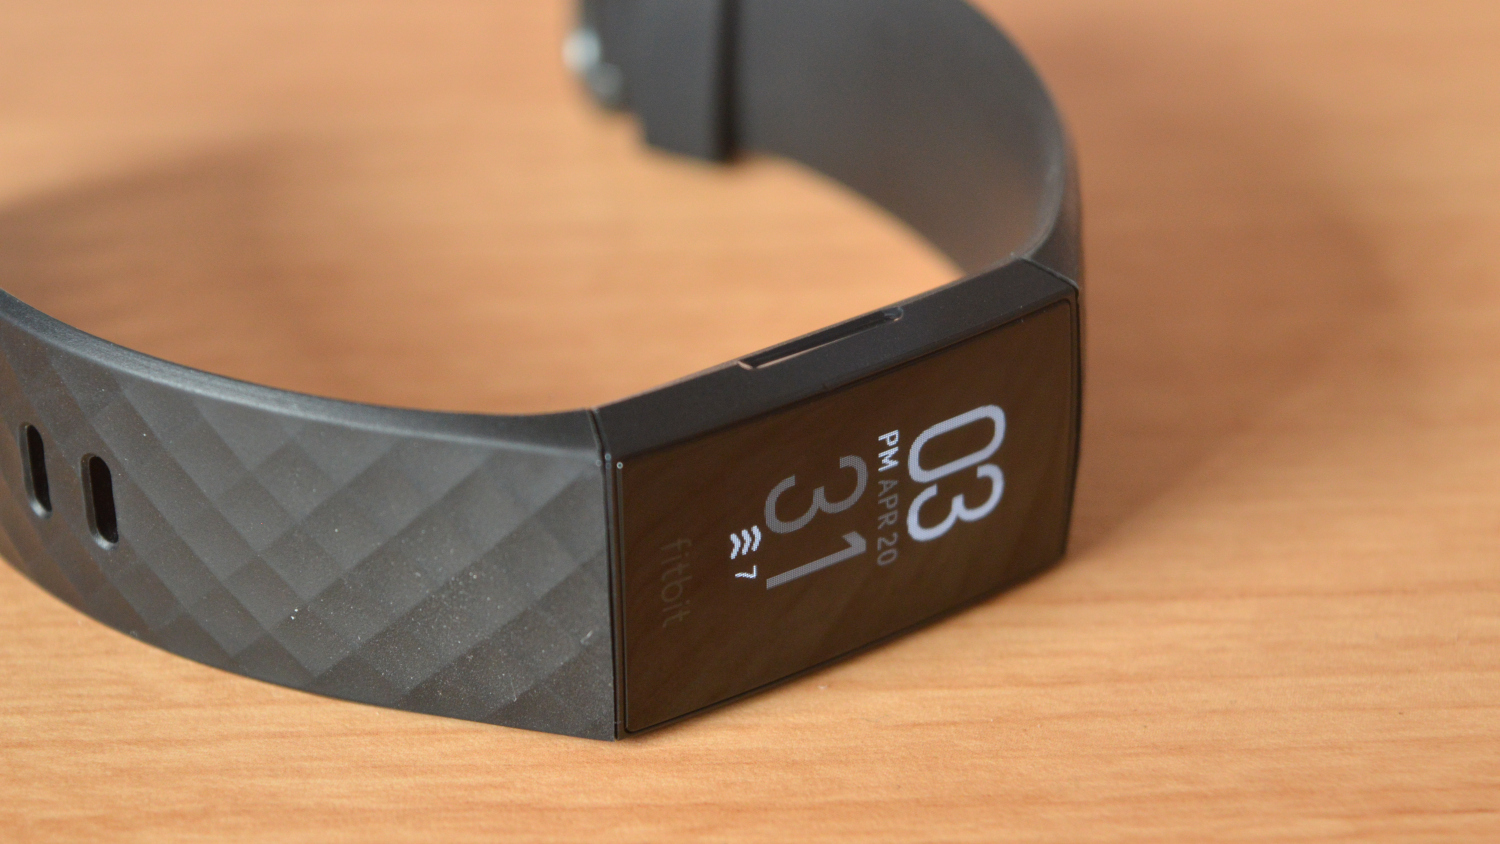 Fitbit Charge 4 Review: The Fitness Tracker To Buy | Digital Trends